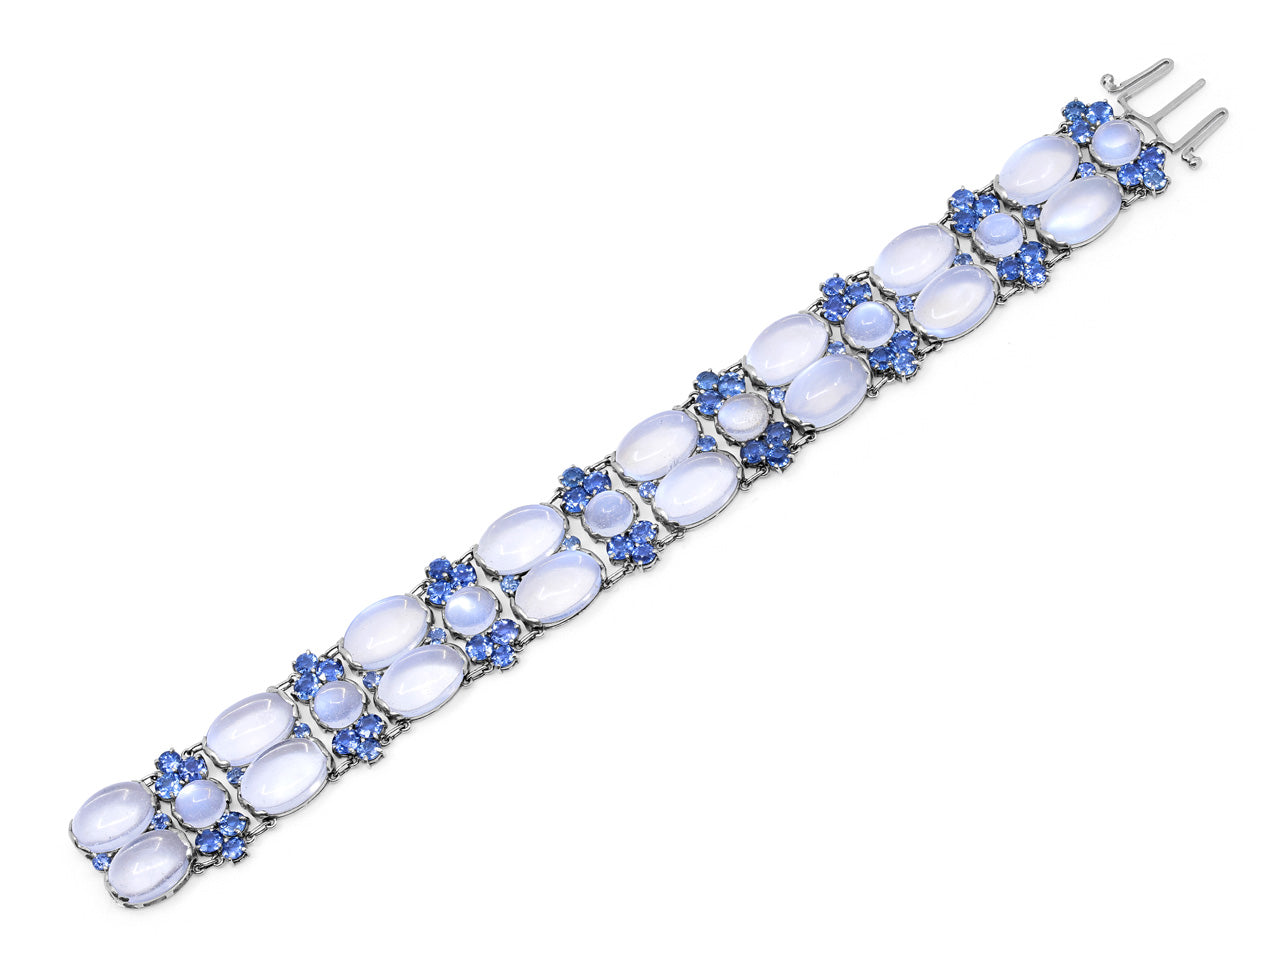 Tiffany & Co. Moonstone and Montana Sapphire Bracelet in Platinum, by Louis Comfort Tiffany